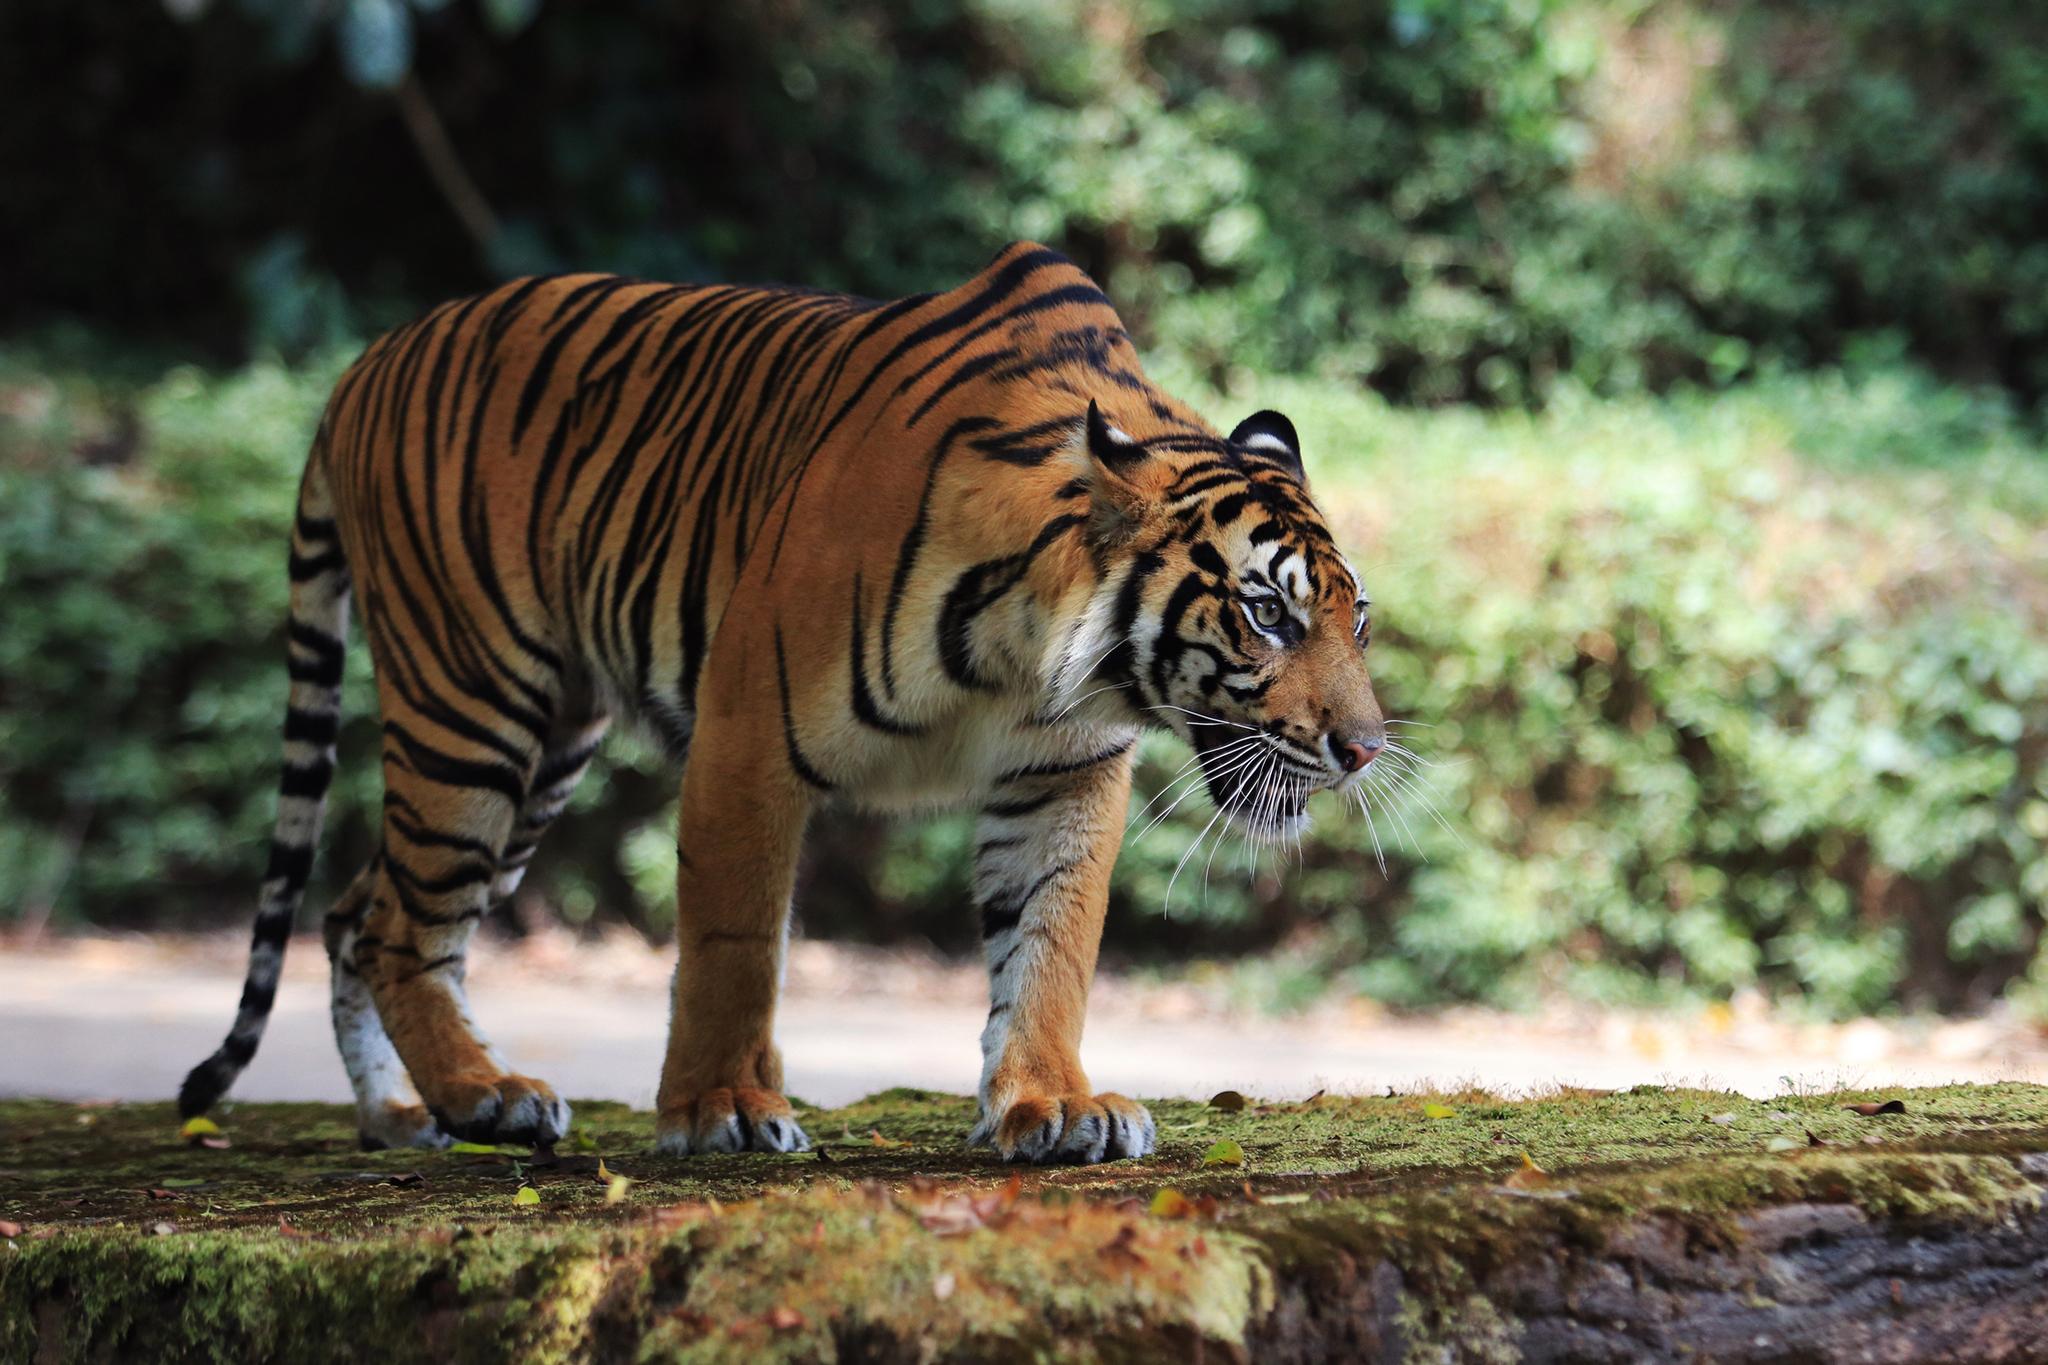 India is home to about 60 per cent of the world’s tiger population